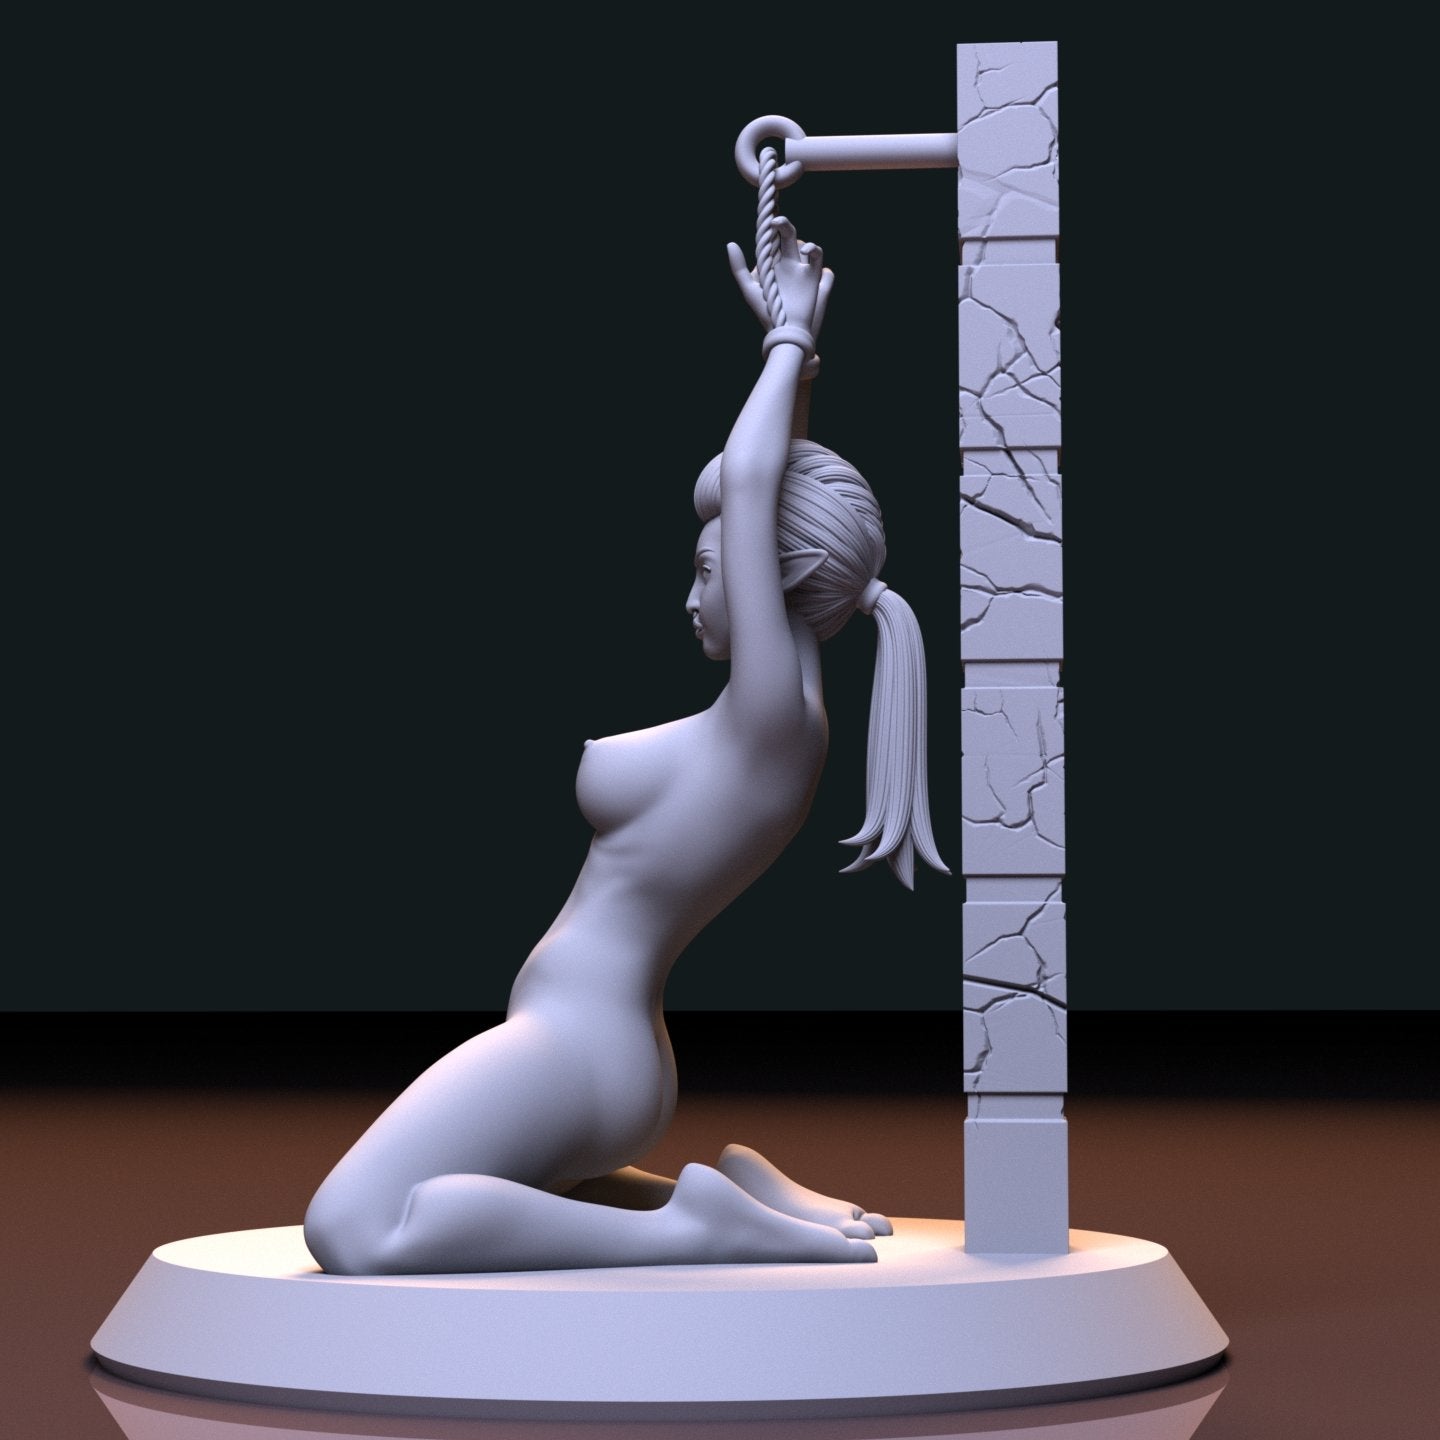 Orc slave girl NSFW 3D Printed Figurine Fanart Unpainted Miniature Collectibles